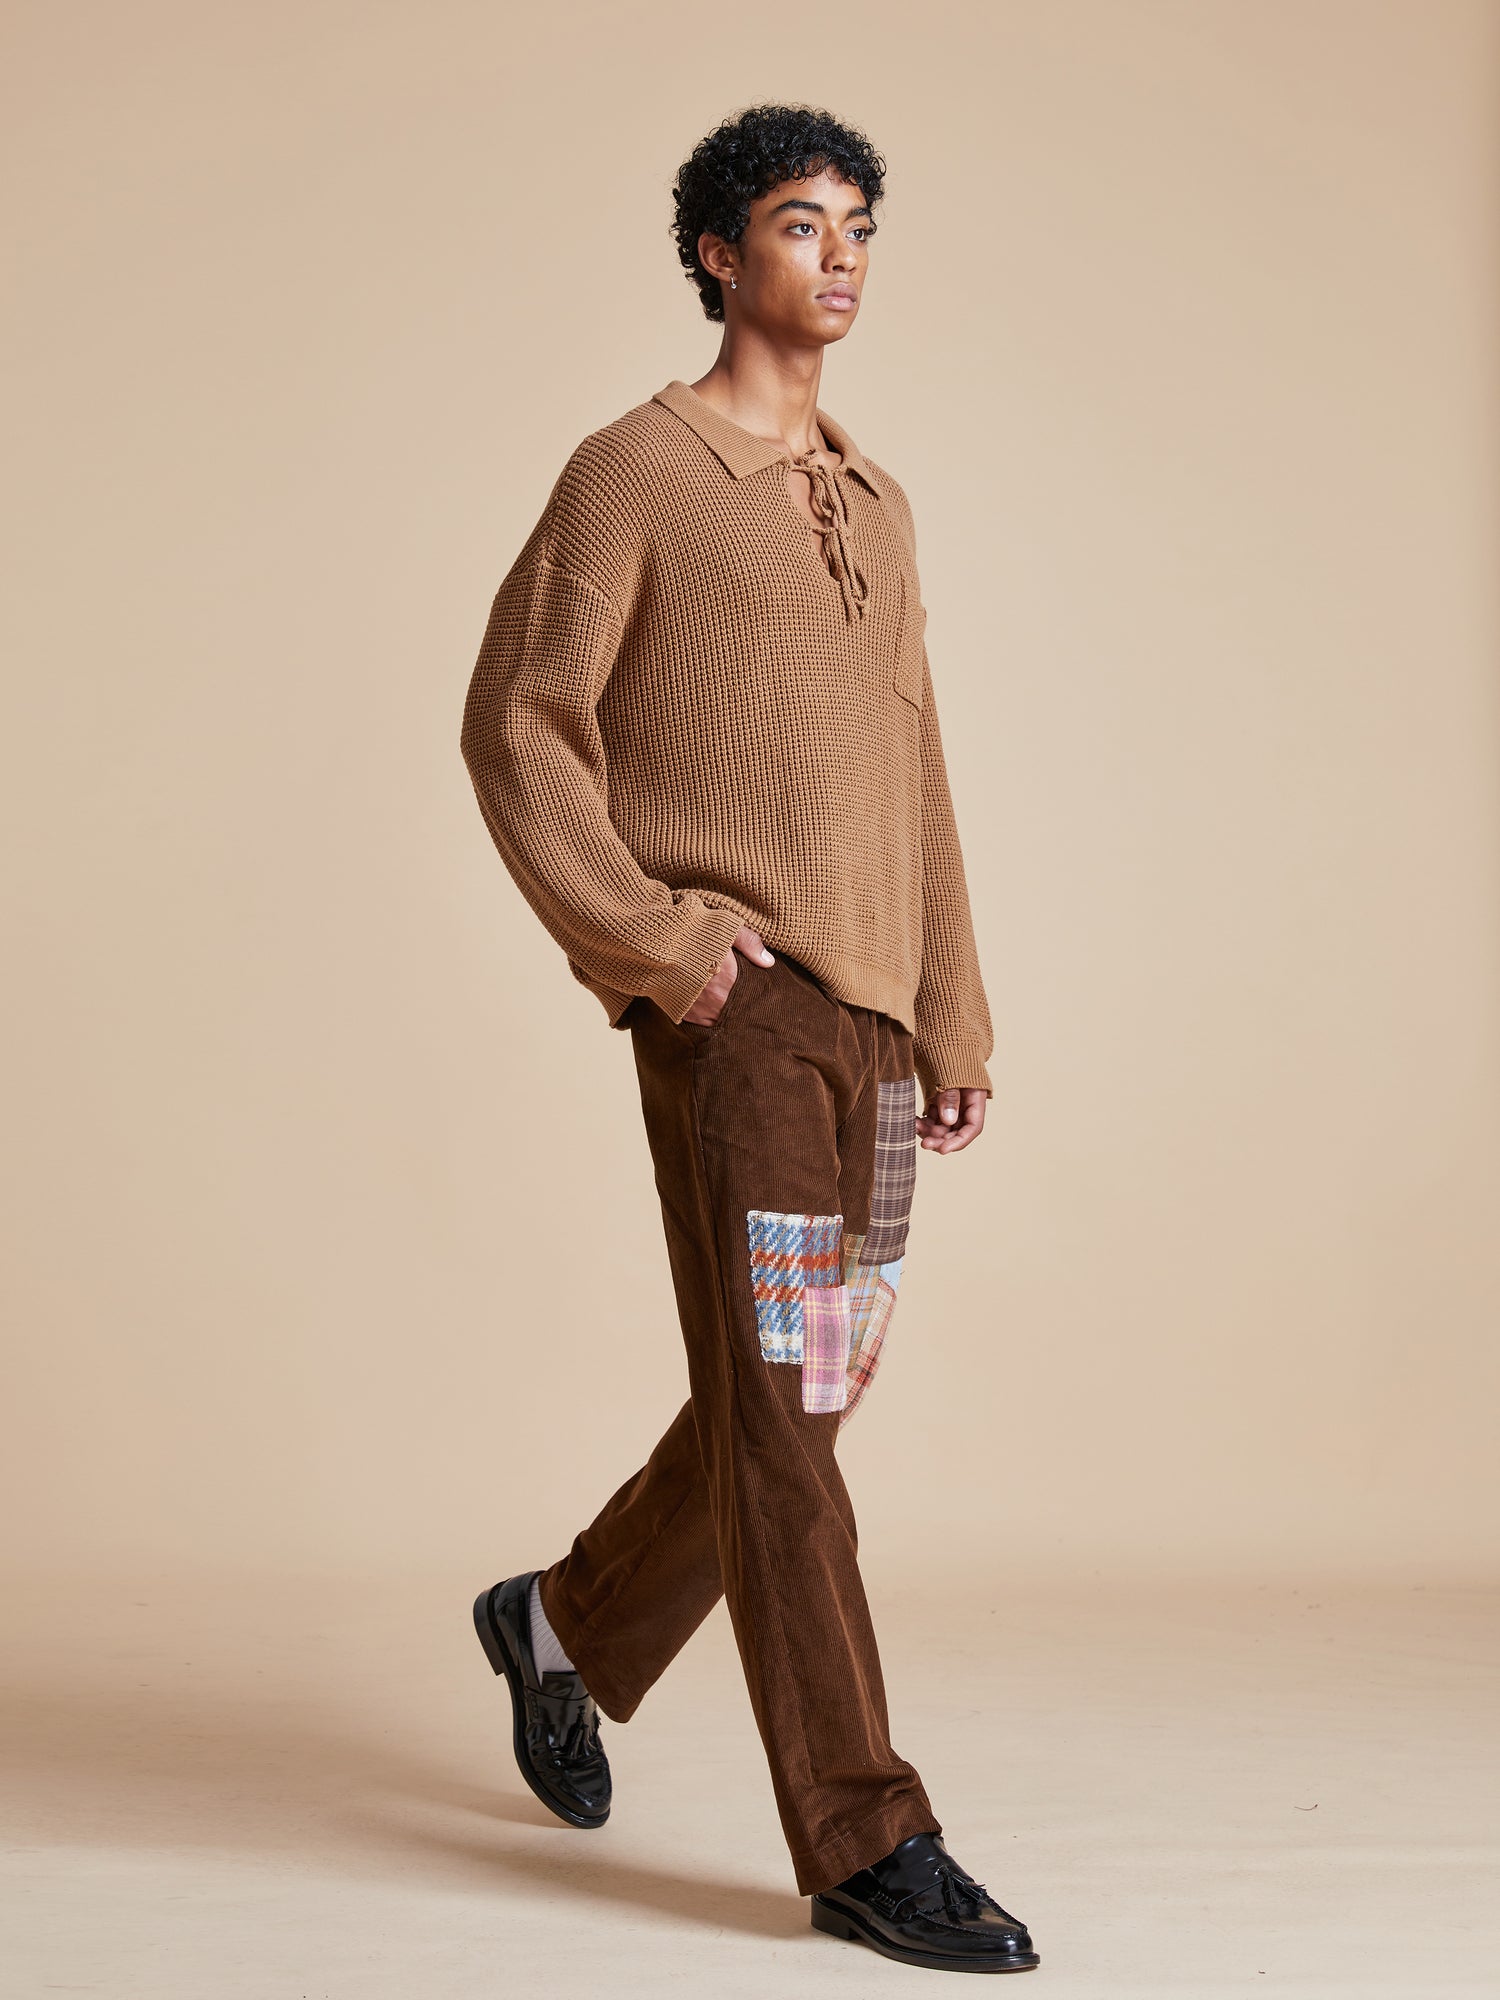 The model is wearing a ginger-colored Tie-Collar Knit Sweater from Found with a cozy feel.